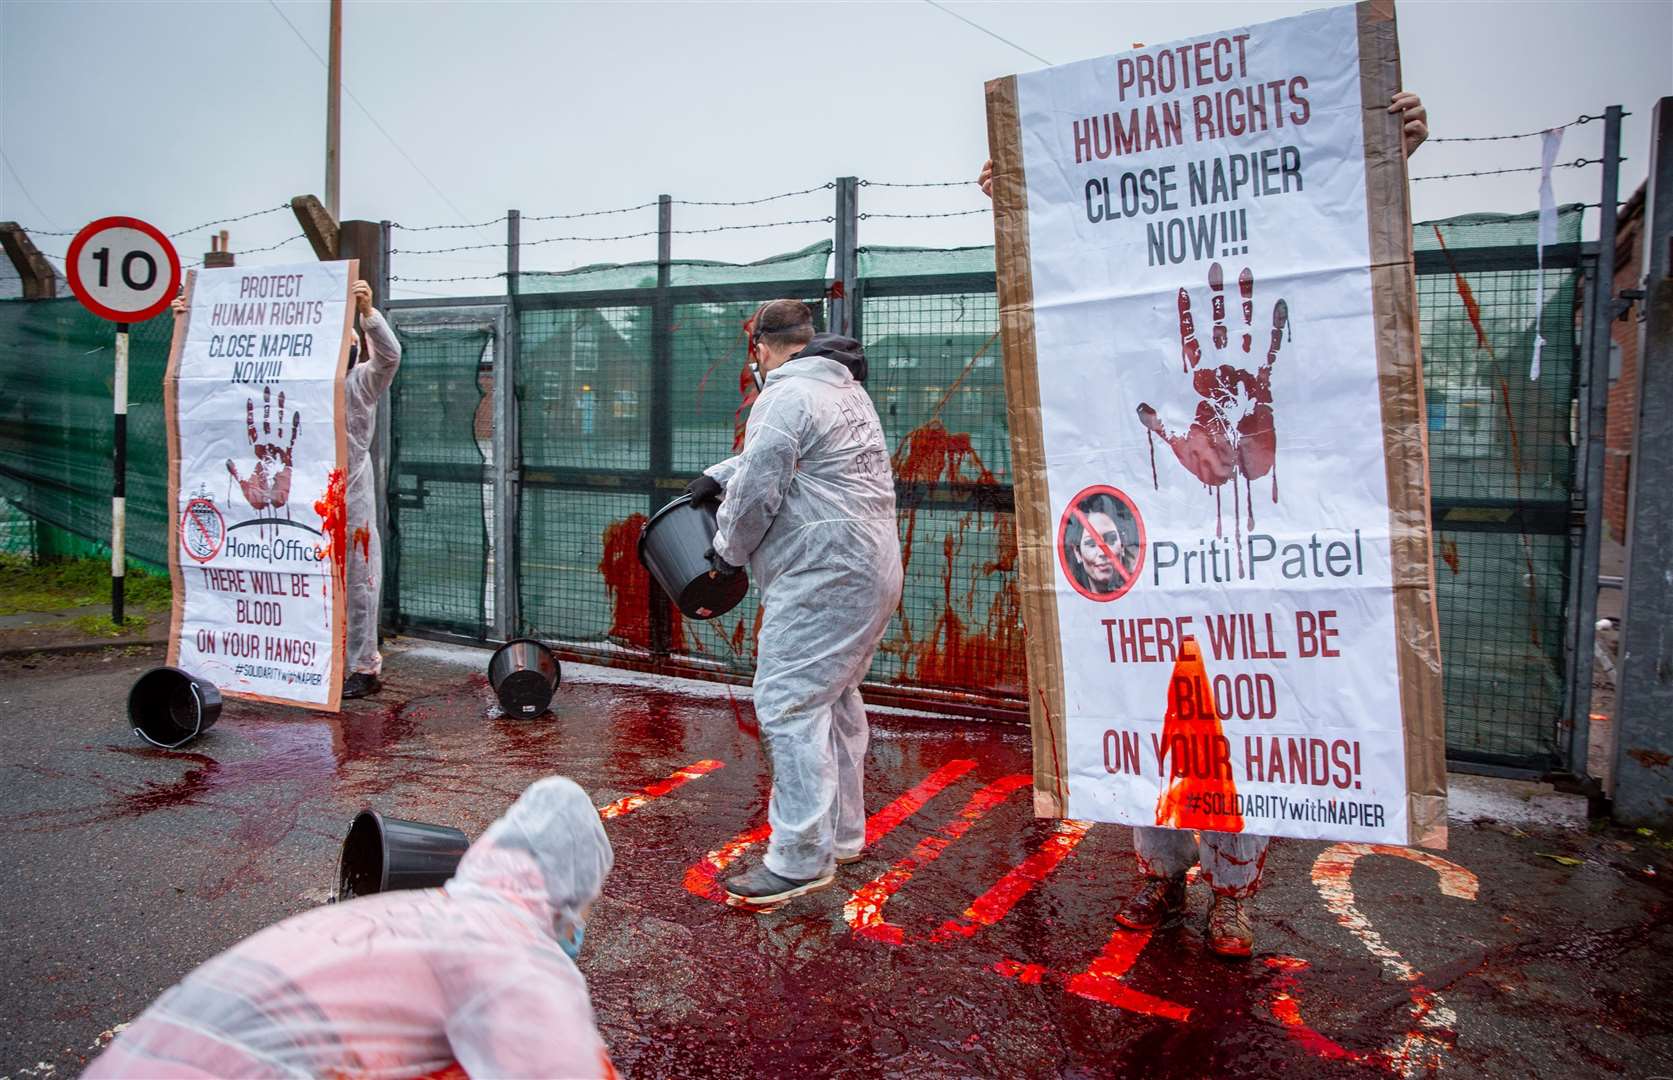 Activists threw buckets of fake blood over the barracks to highlight human rights concerns last year. Picture: Andrew Aitchison/In pictures via Getty Images